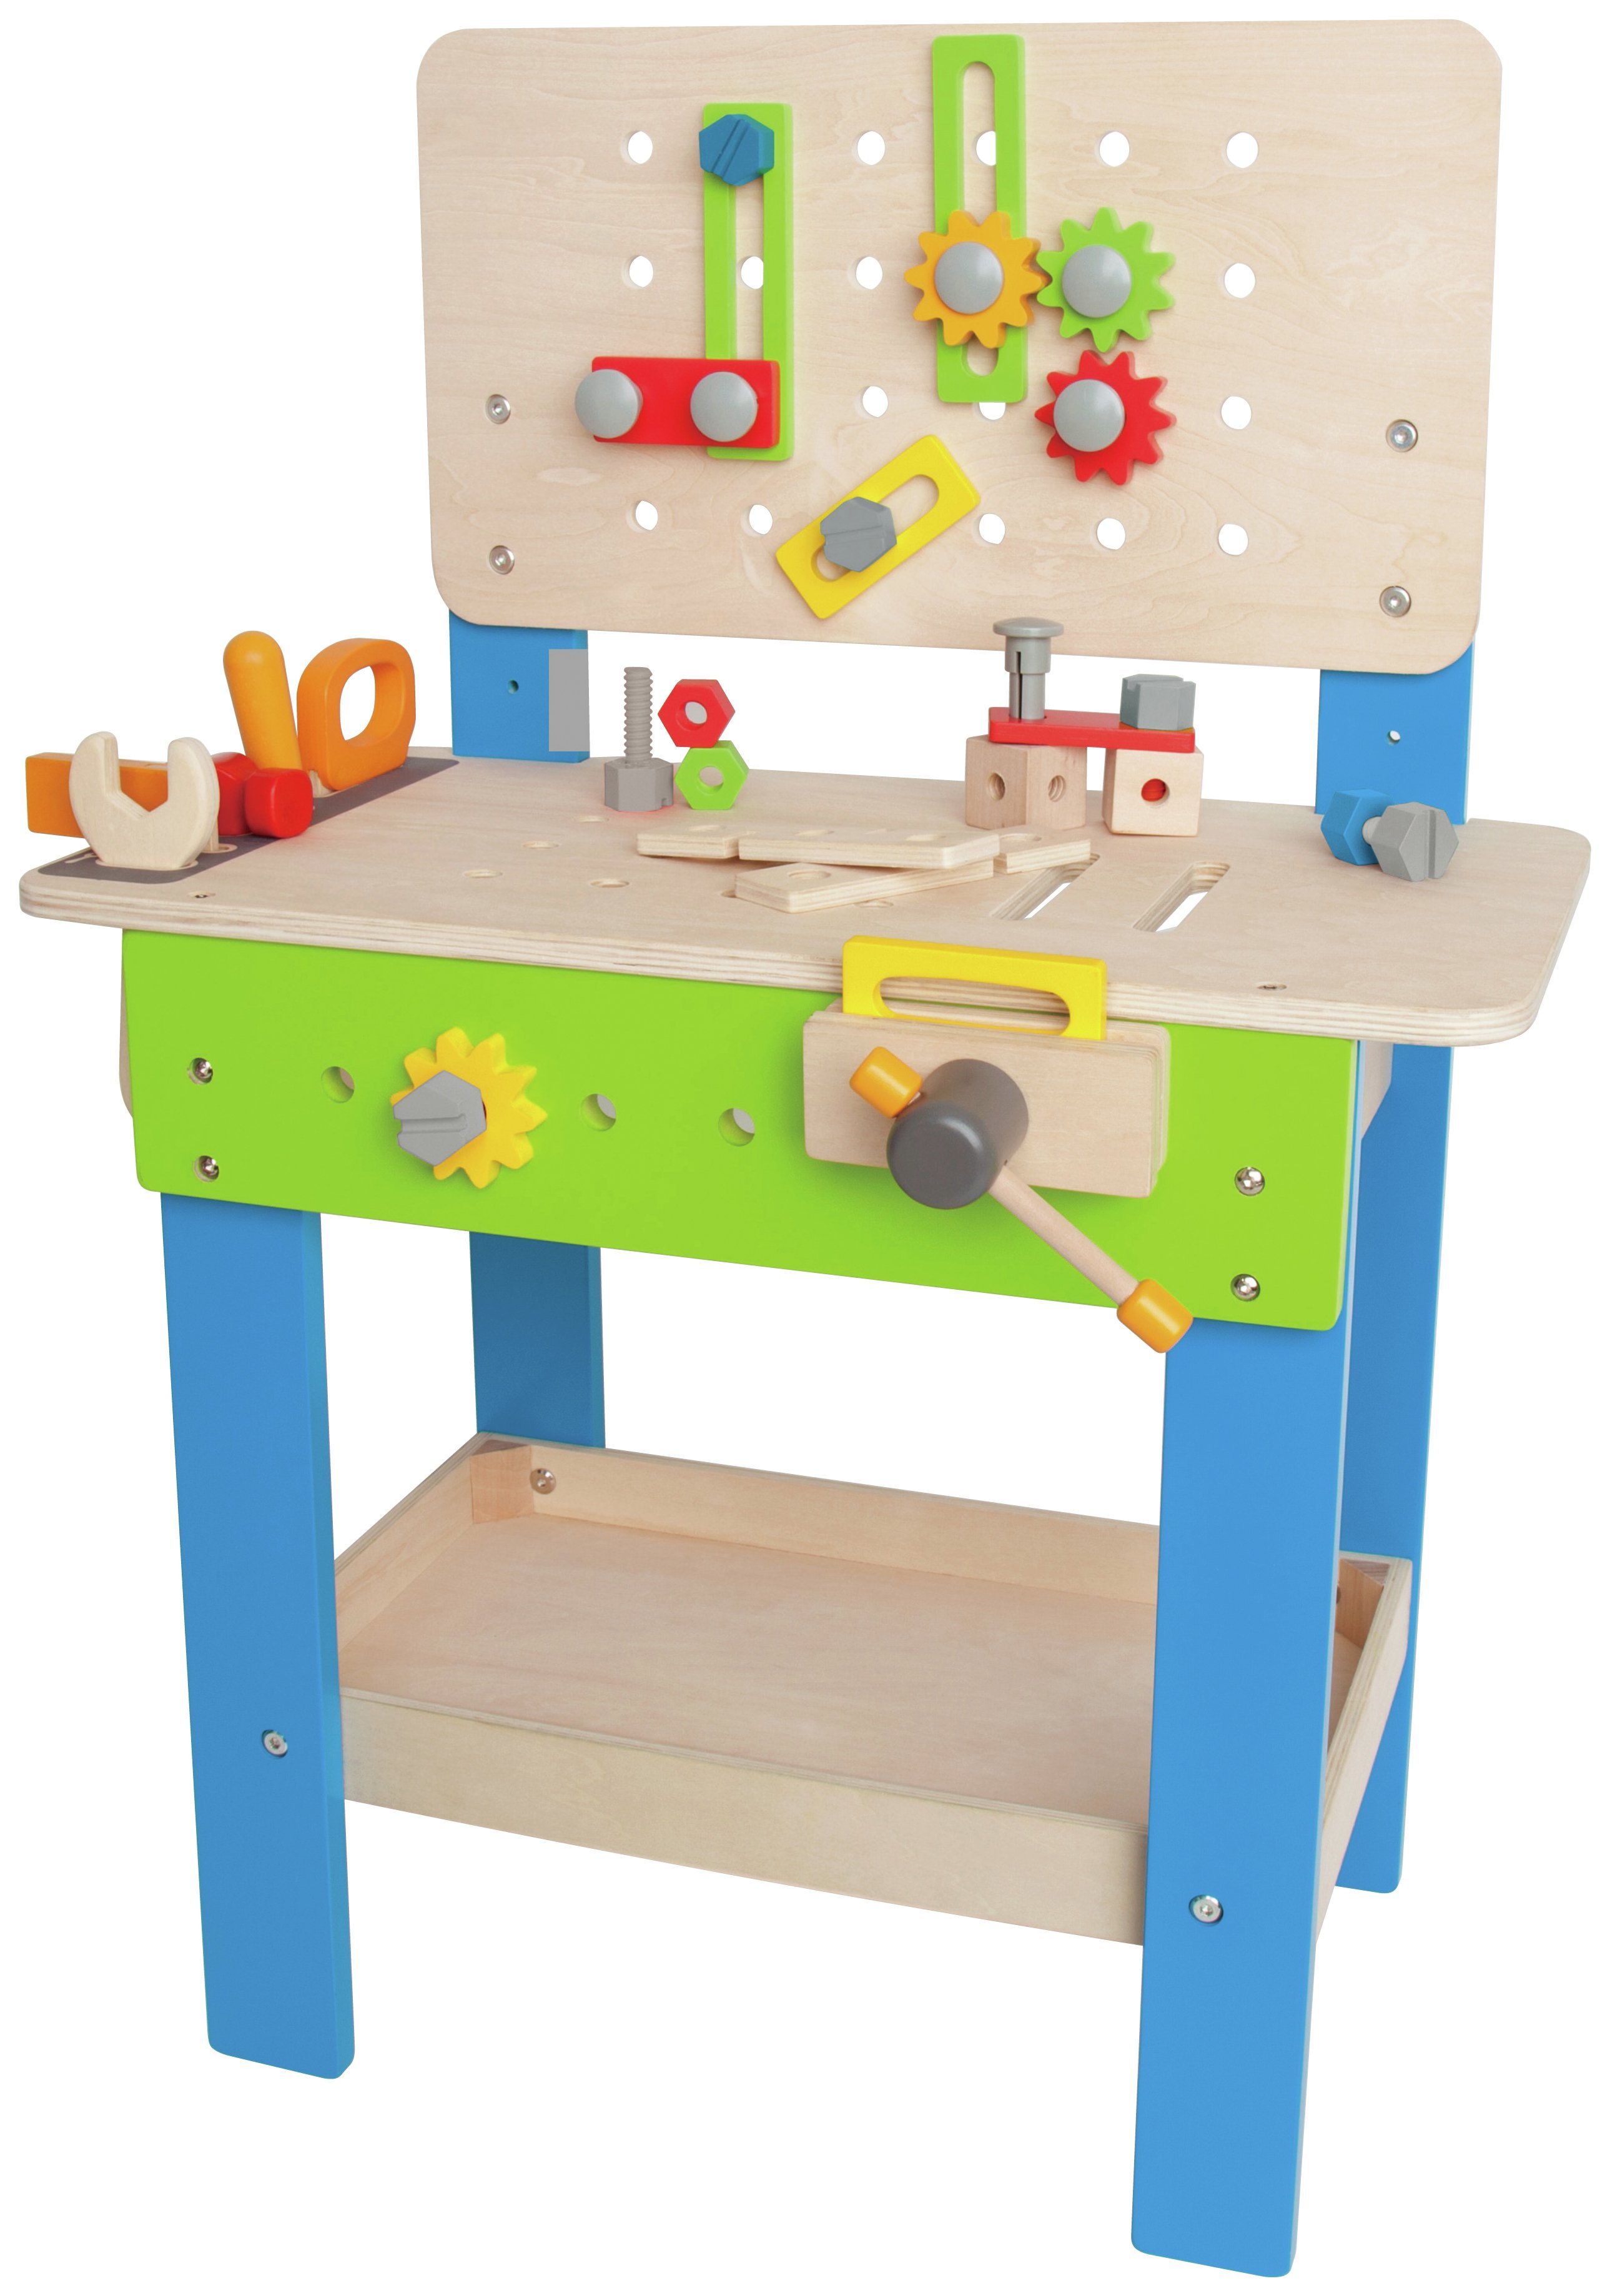 Master Workbench review